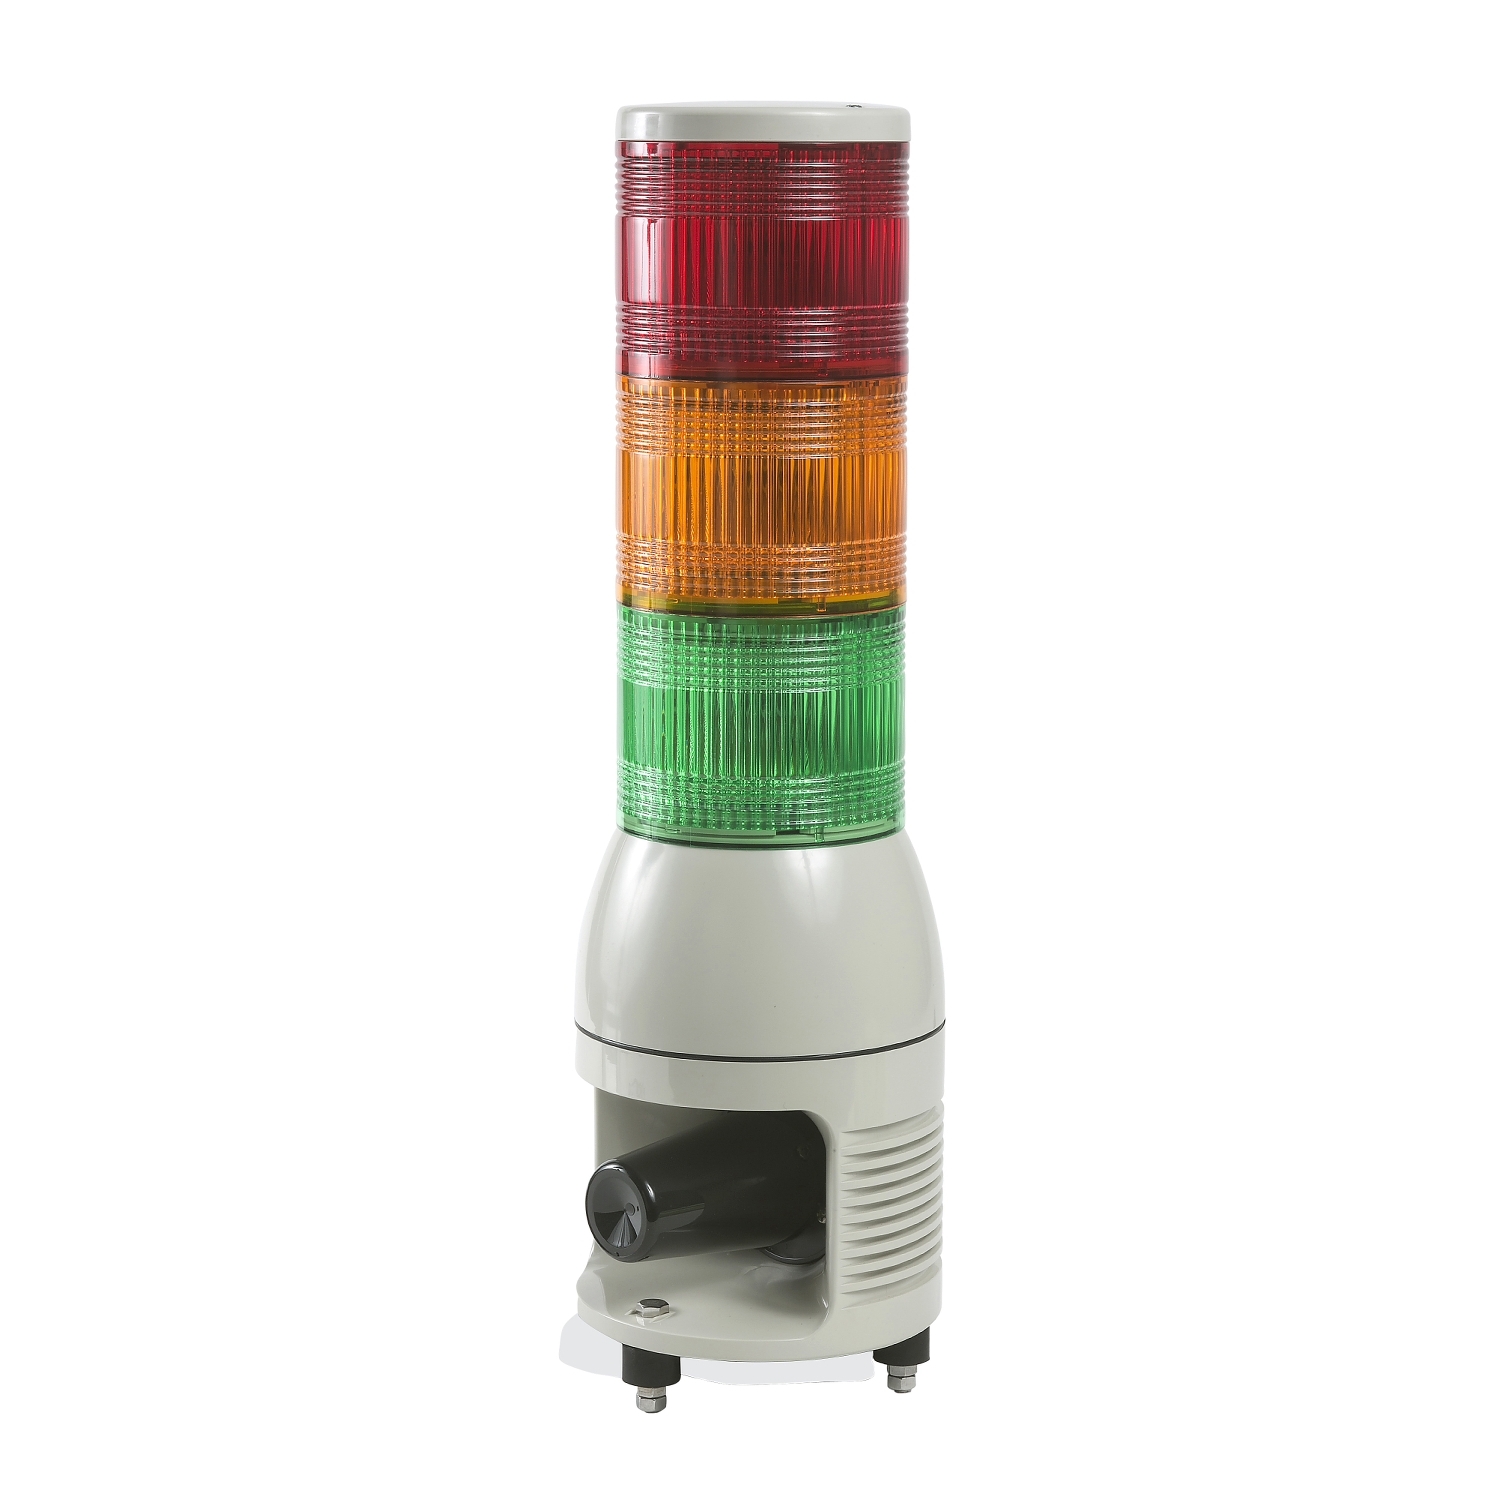 Monolithic tower light， red-orange-green， 100mm， base mounting， steady or flashing， with siren 0...102 dB， IP54， 100…240 V AC